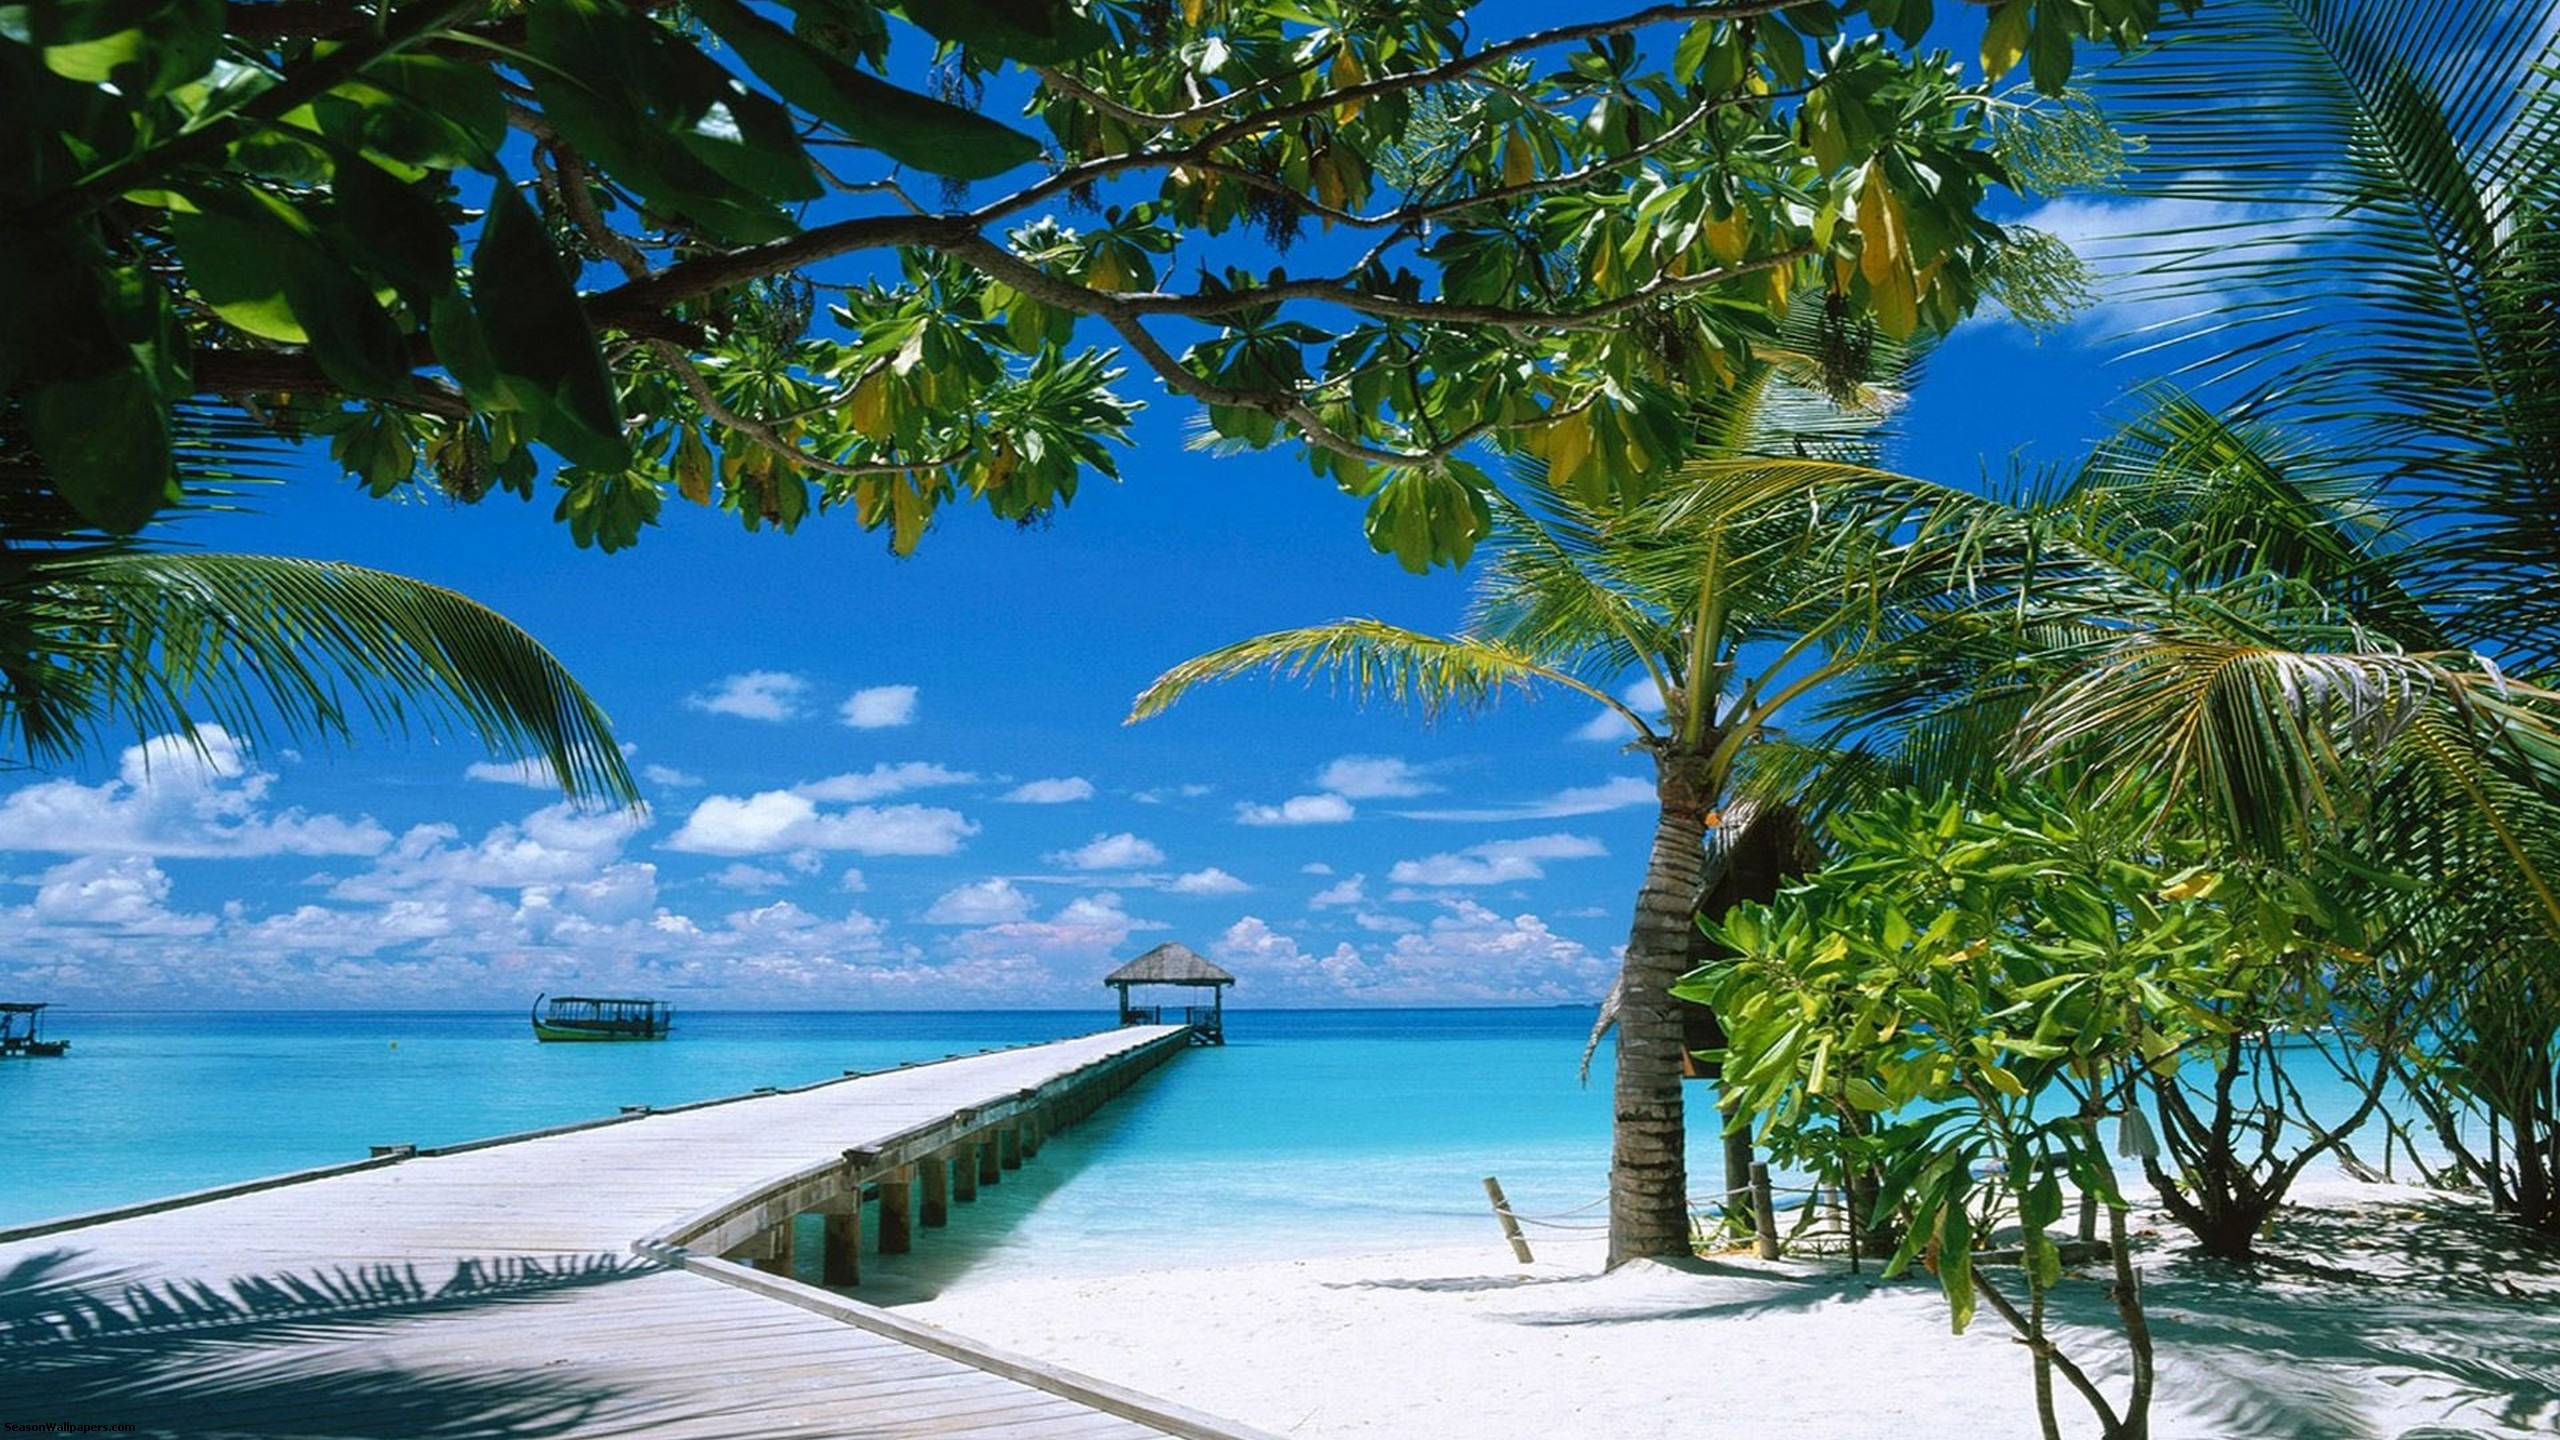 Wallpapers 2560x1440 azur sea with palm trees and a long dais